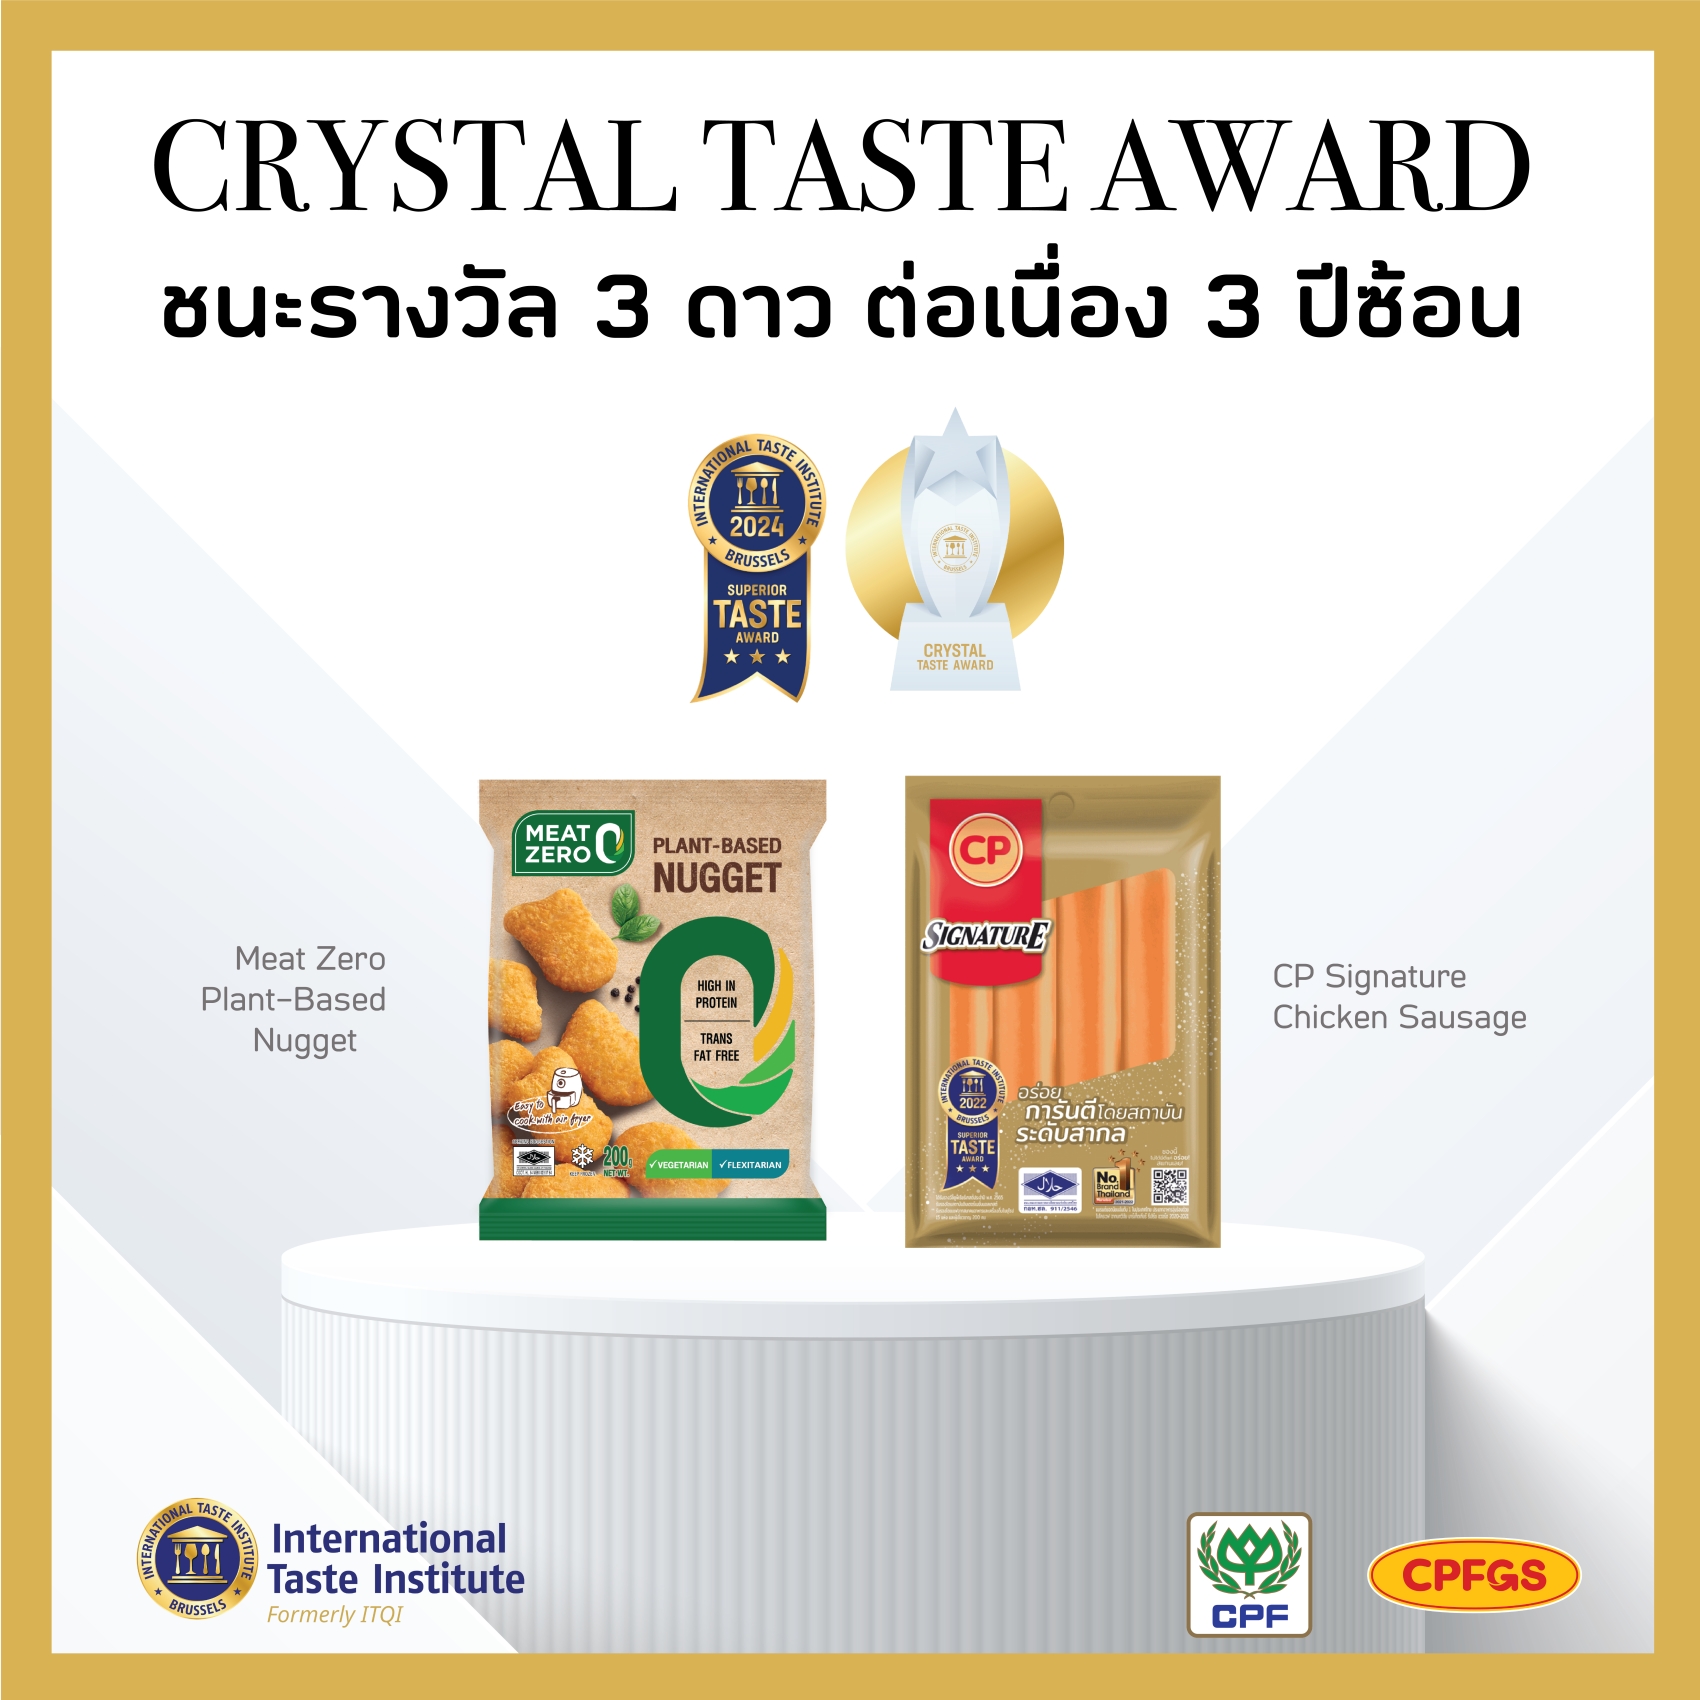 Meat Zero Plant-Based Nuggets and CP Chicken Sausage Win Crystal Taste Award for Exceptional Quality and Taste from the International Taste Institute